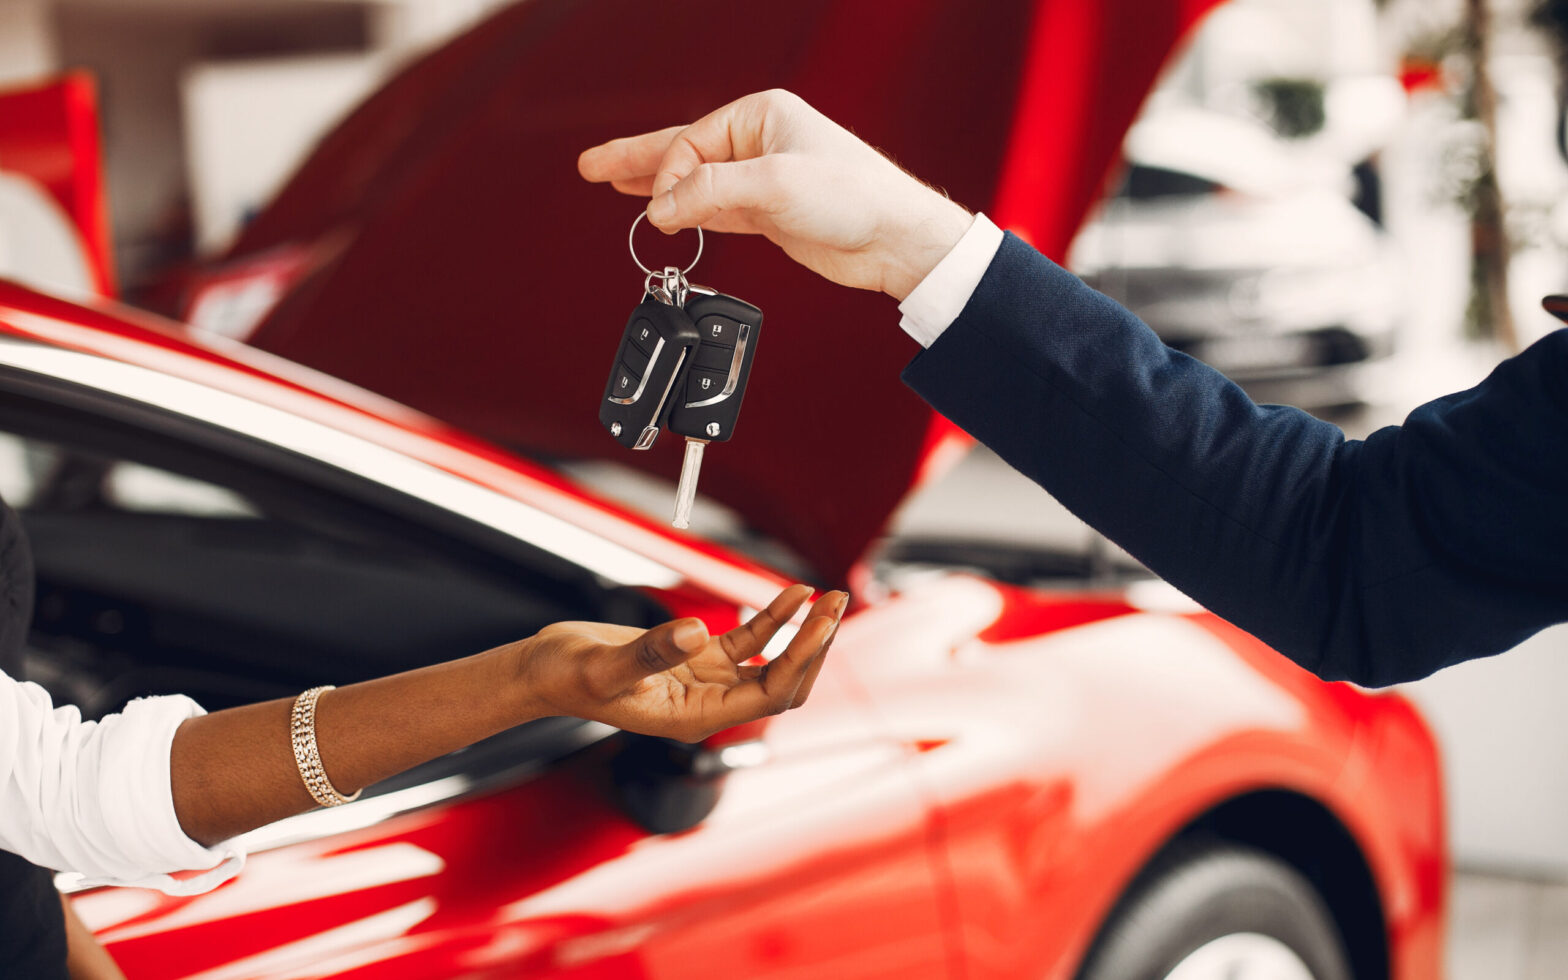 Things to consider before buying leased vehicle.